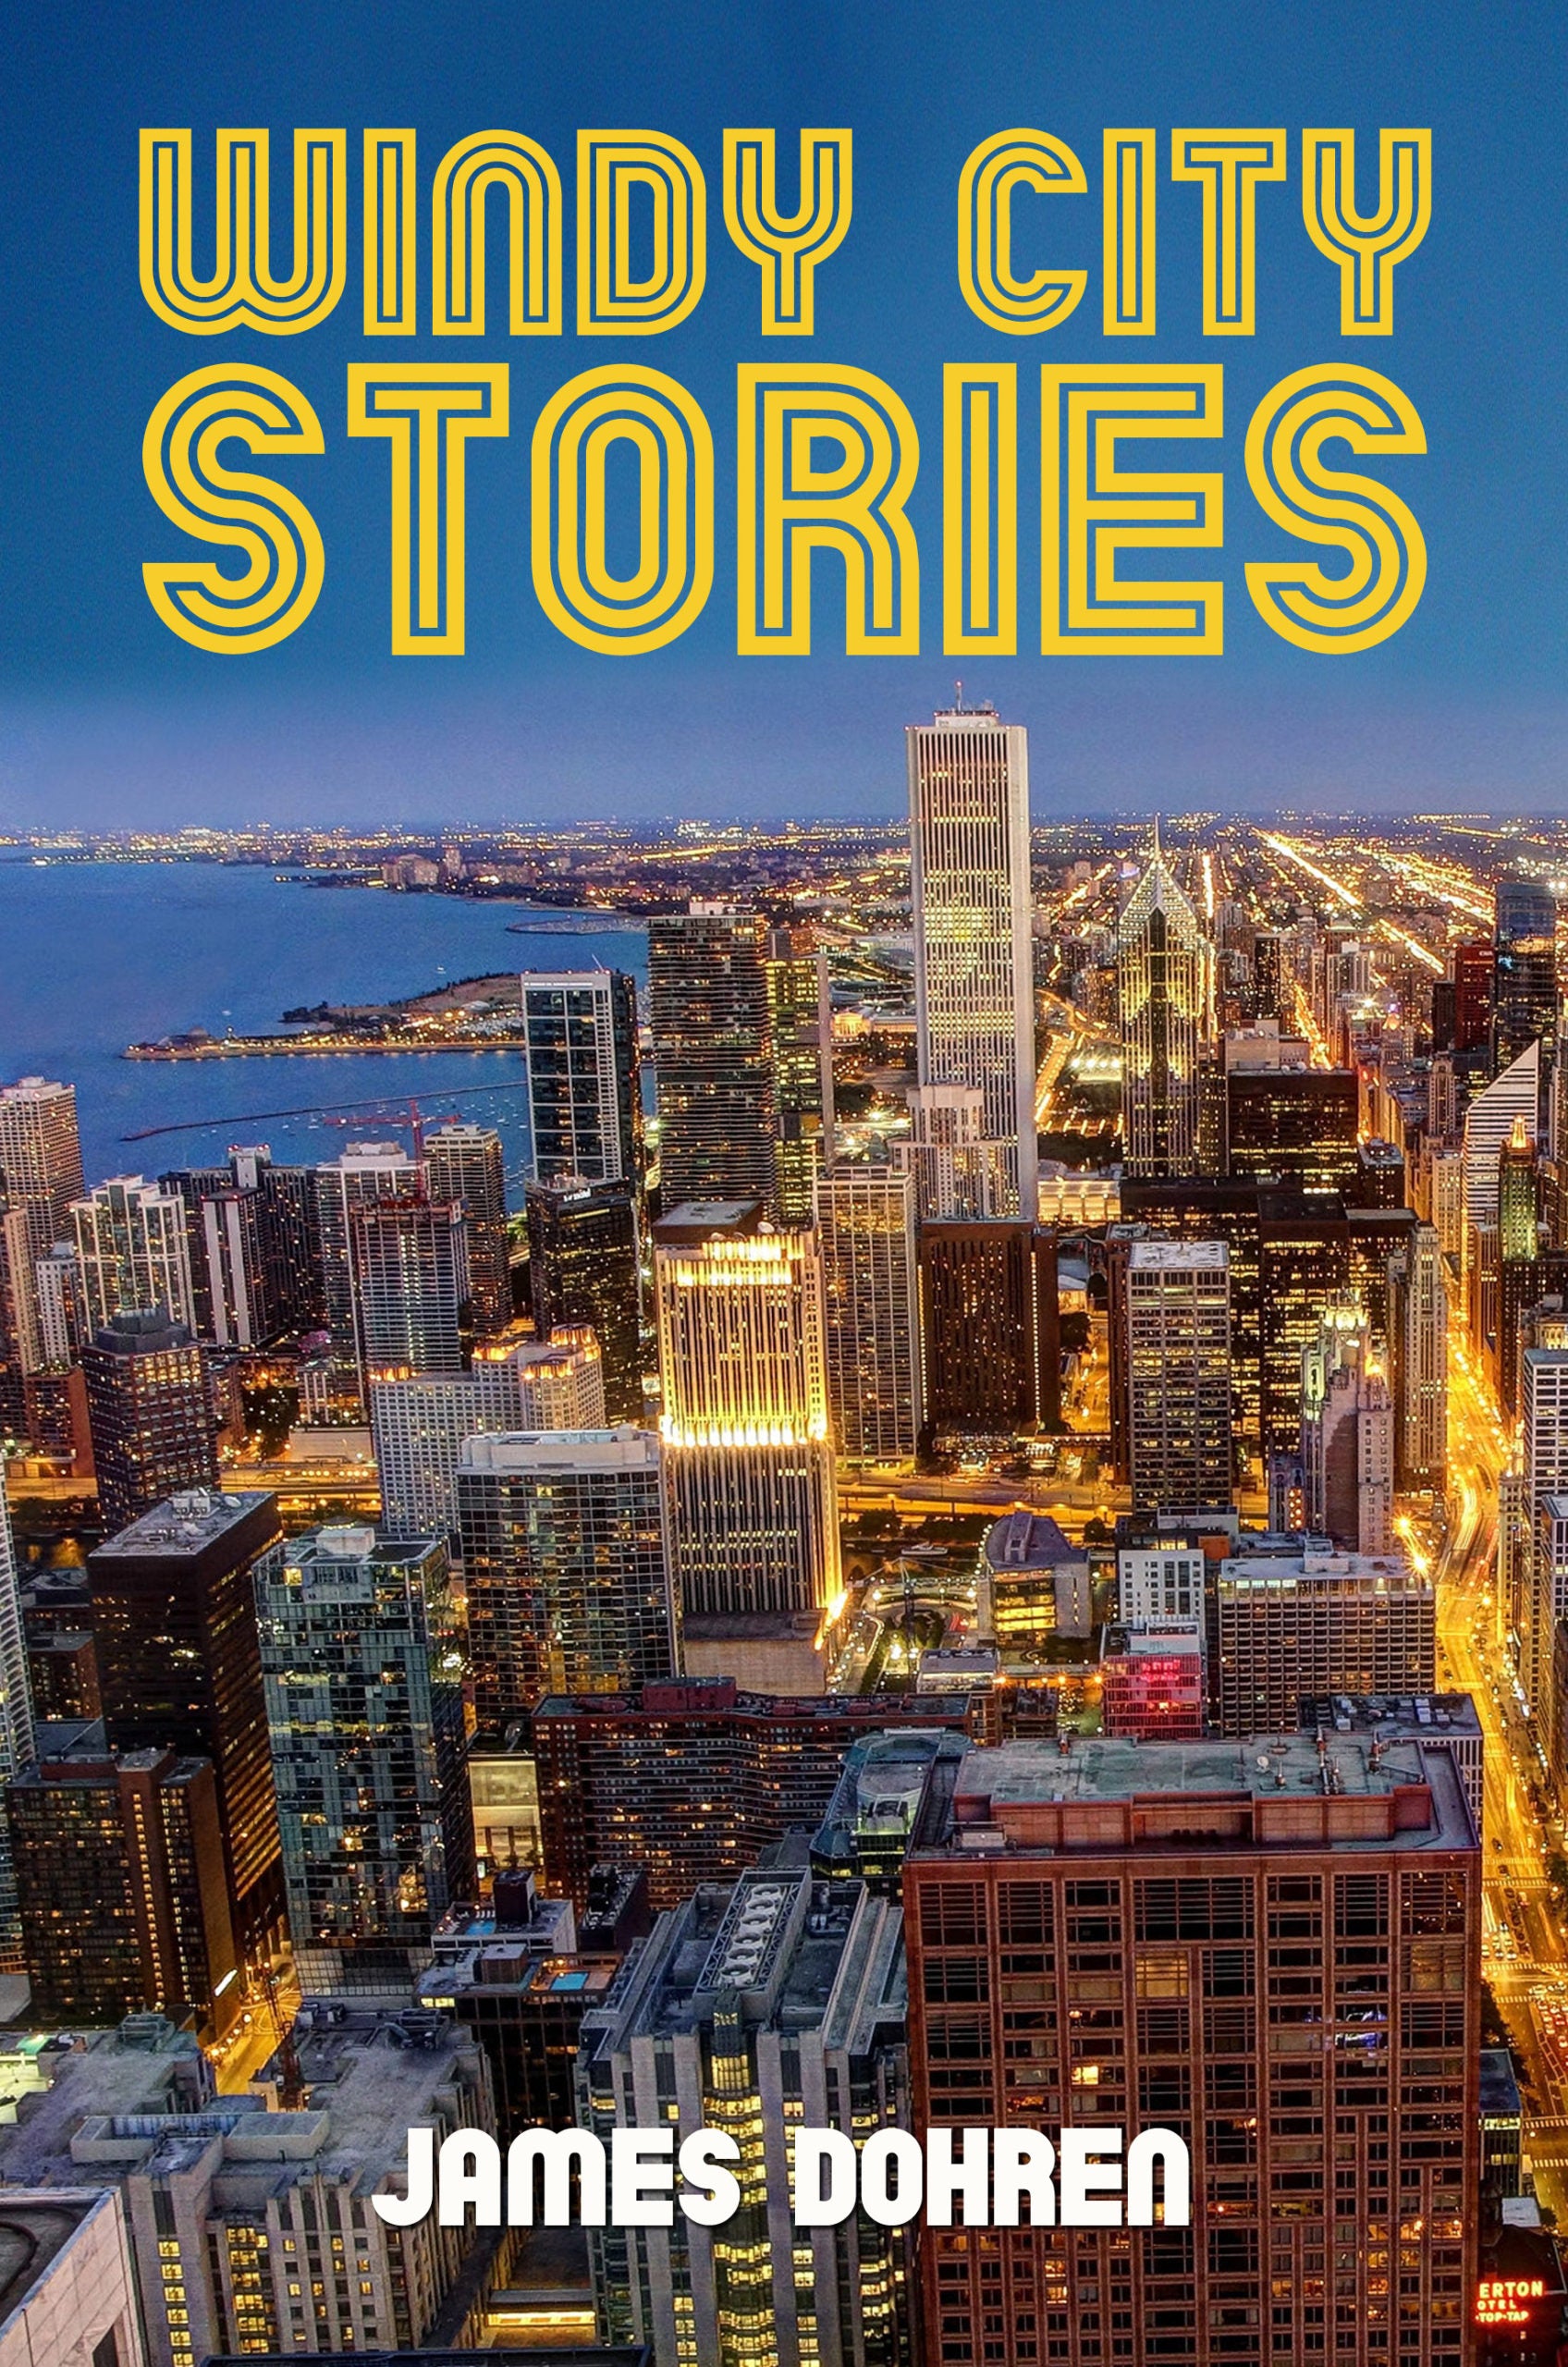 James Dohren’s “Windy City Stories” is the Brown Posey Press bestseller for March